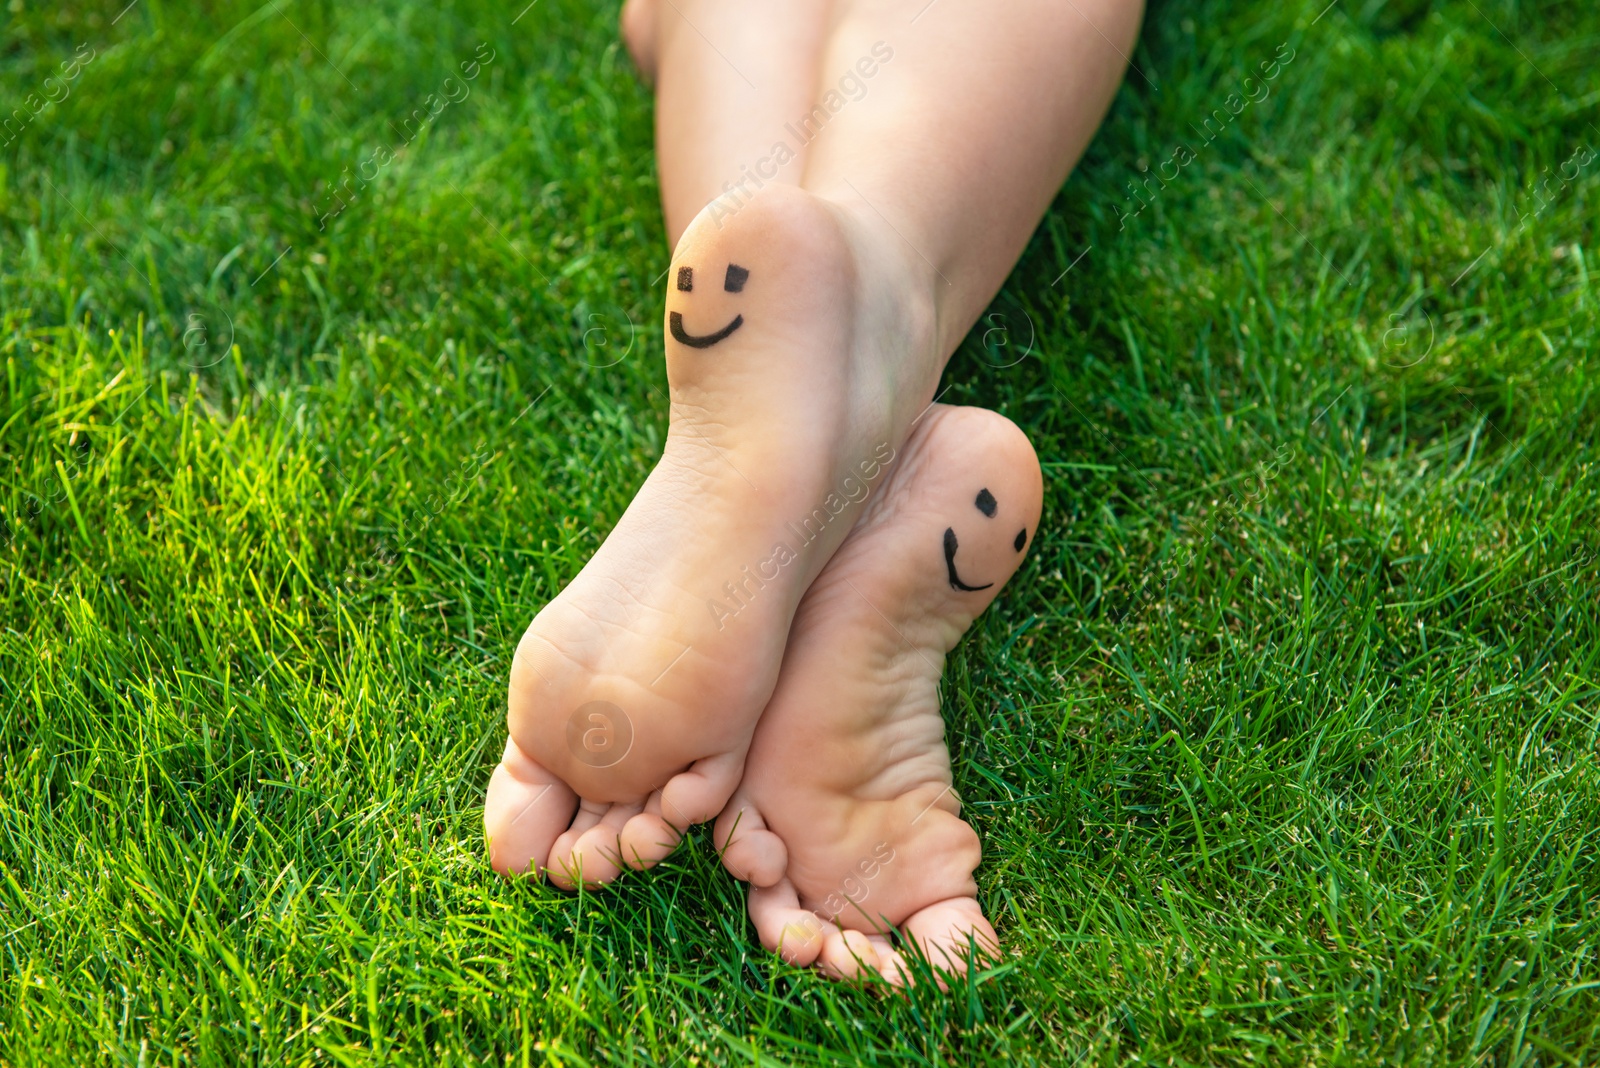 Photo of Teenage girl with smiling faces drawn on heels outdoors, closeup